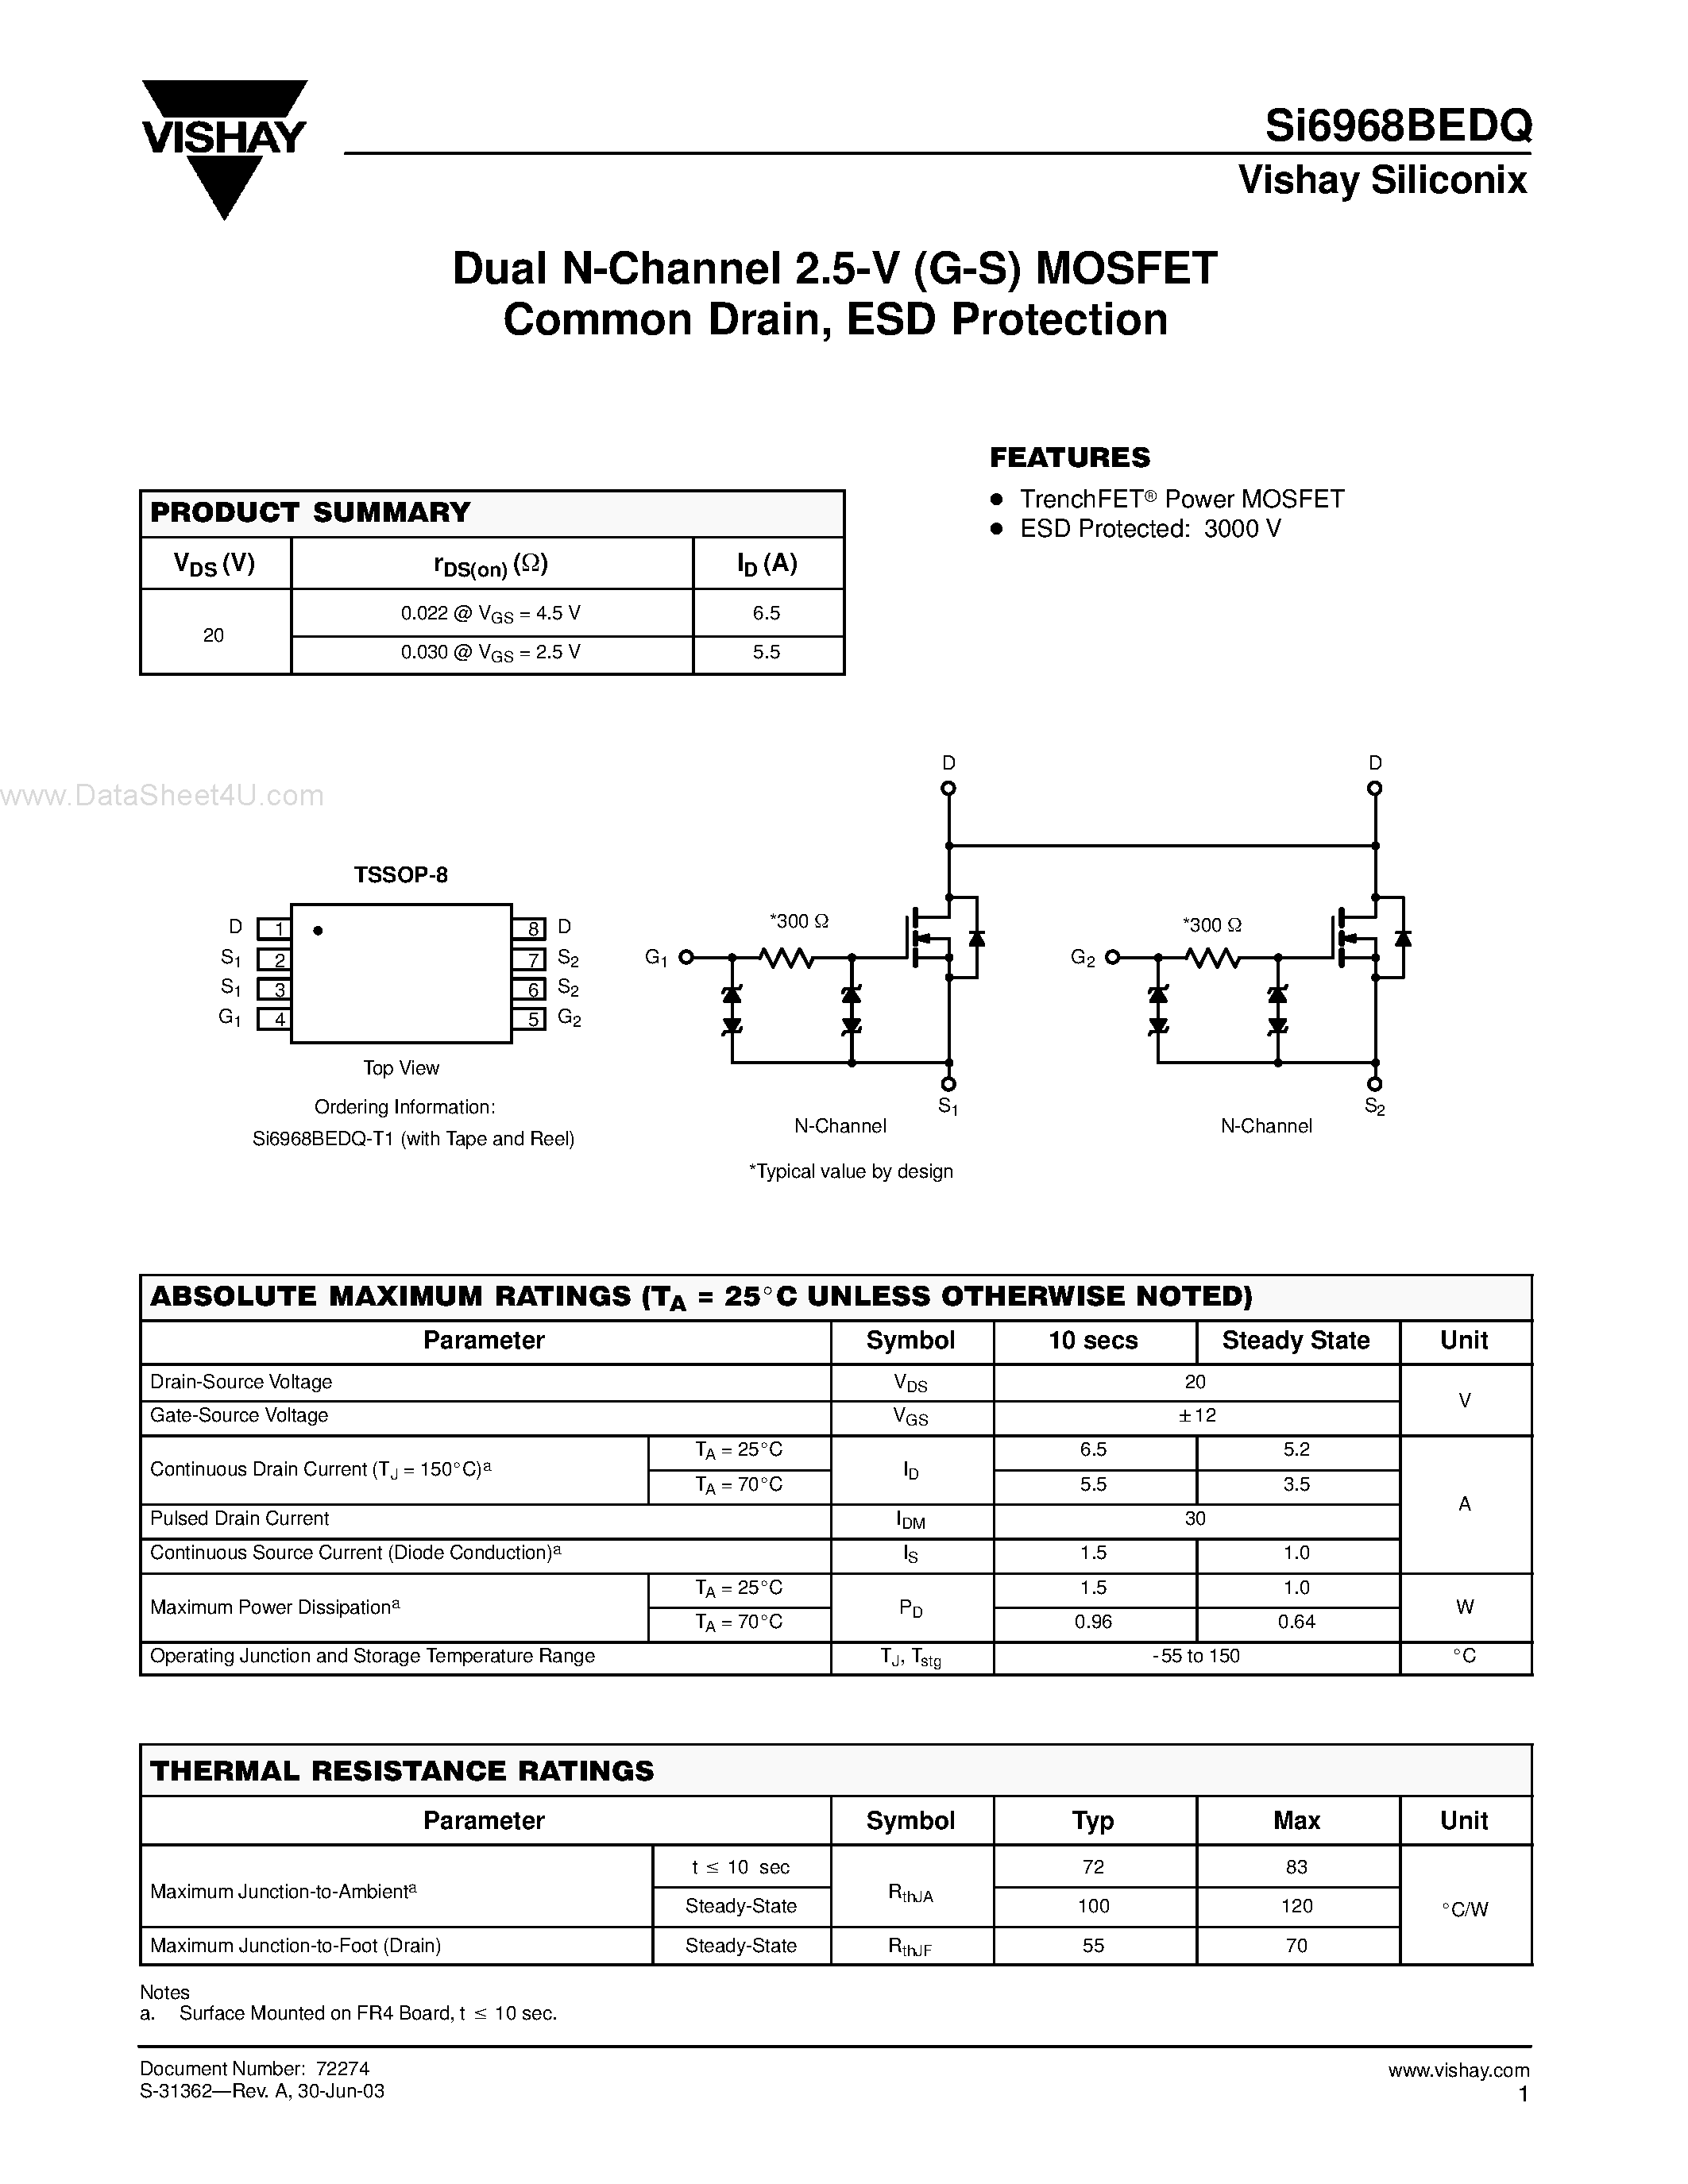 Datasheet SI6968BEDQ - Dual N-Channel 2.5-V (G-S) MOSFET Common Drain page 1